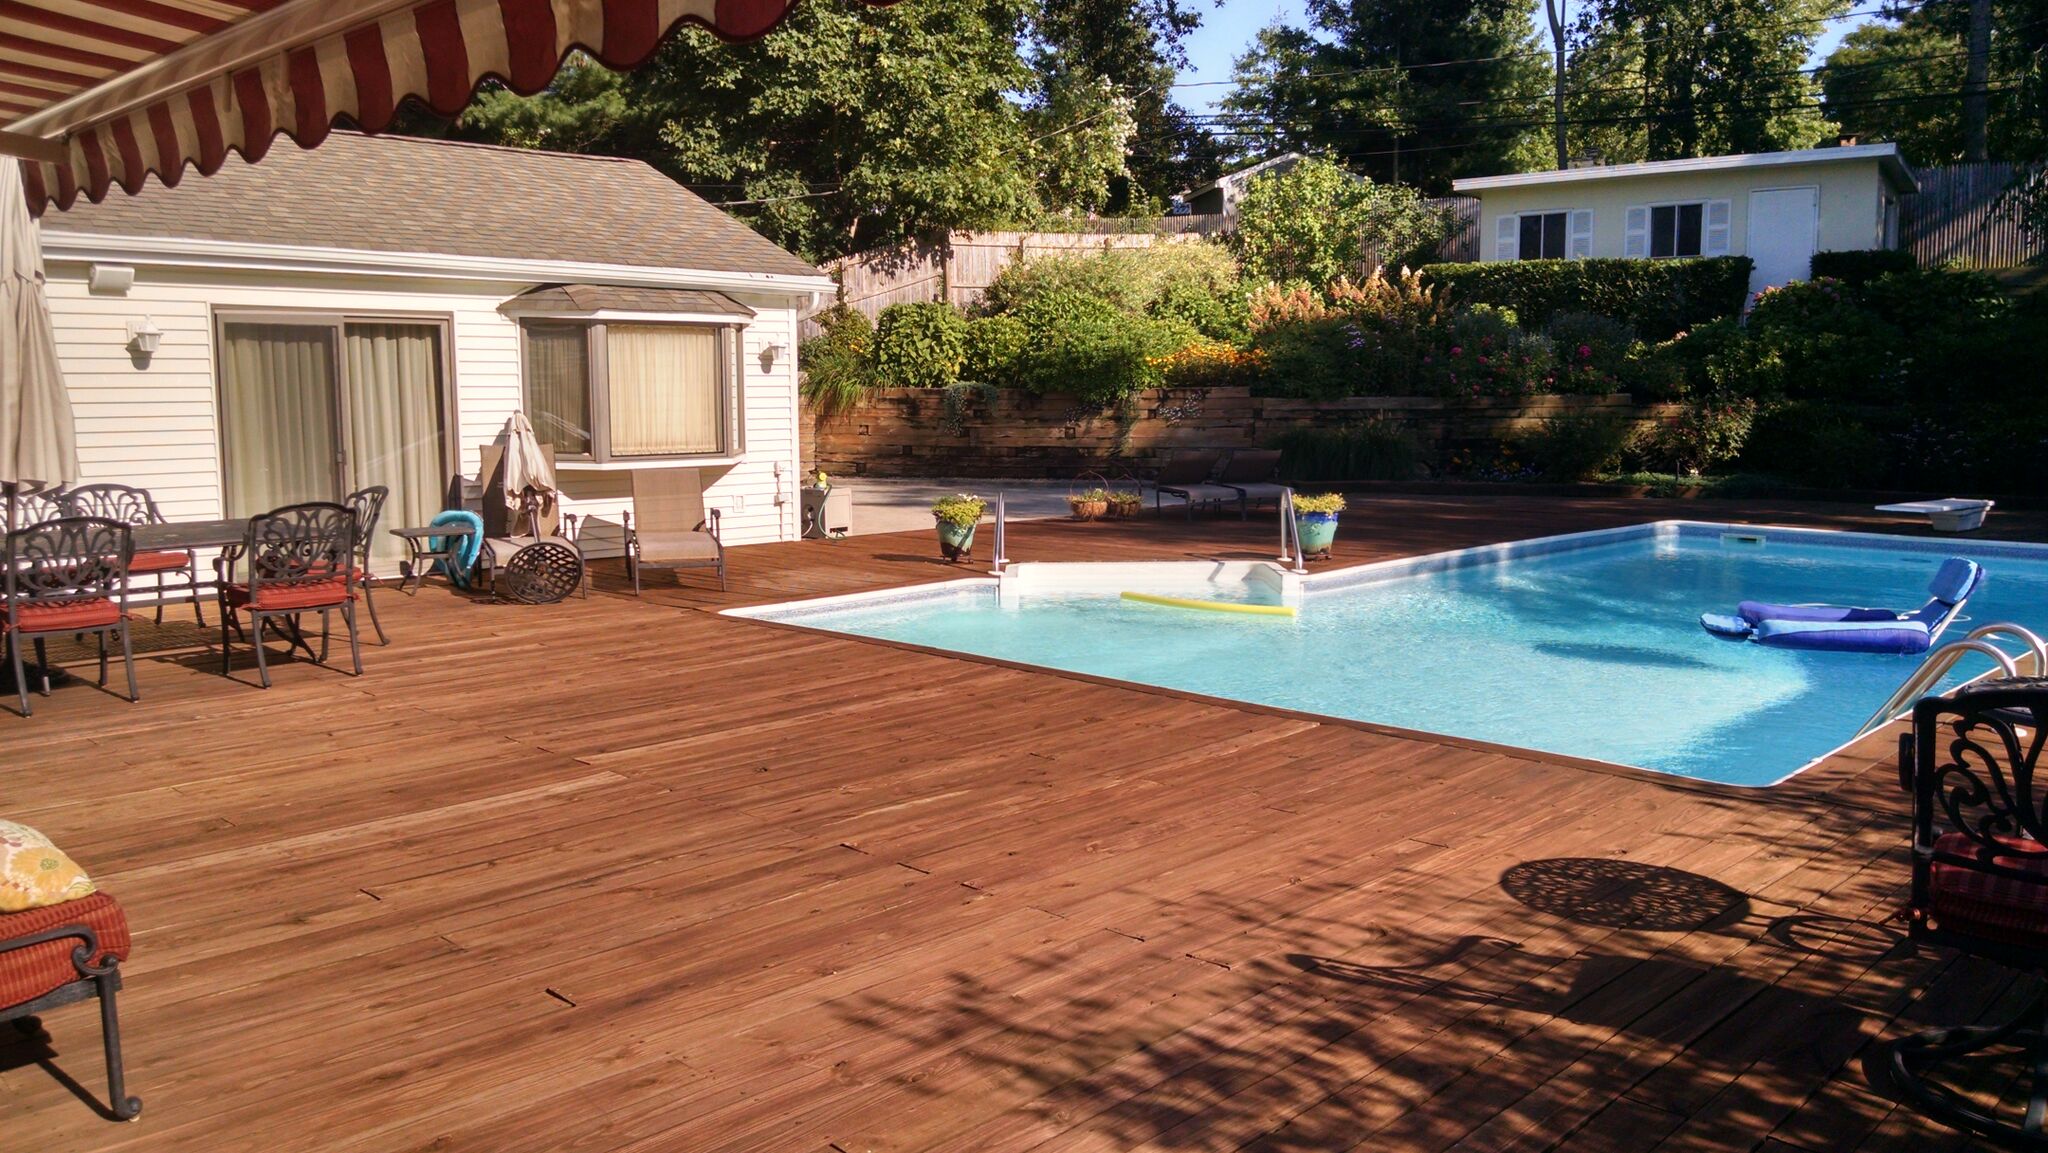 Old Pressure Treated Deck Boards: